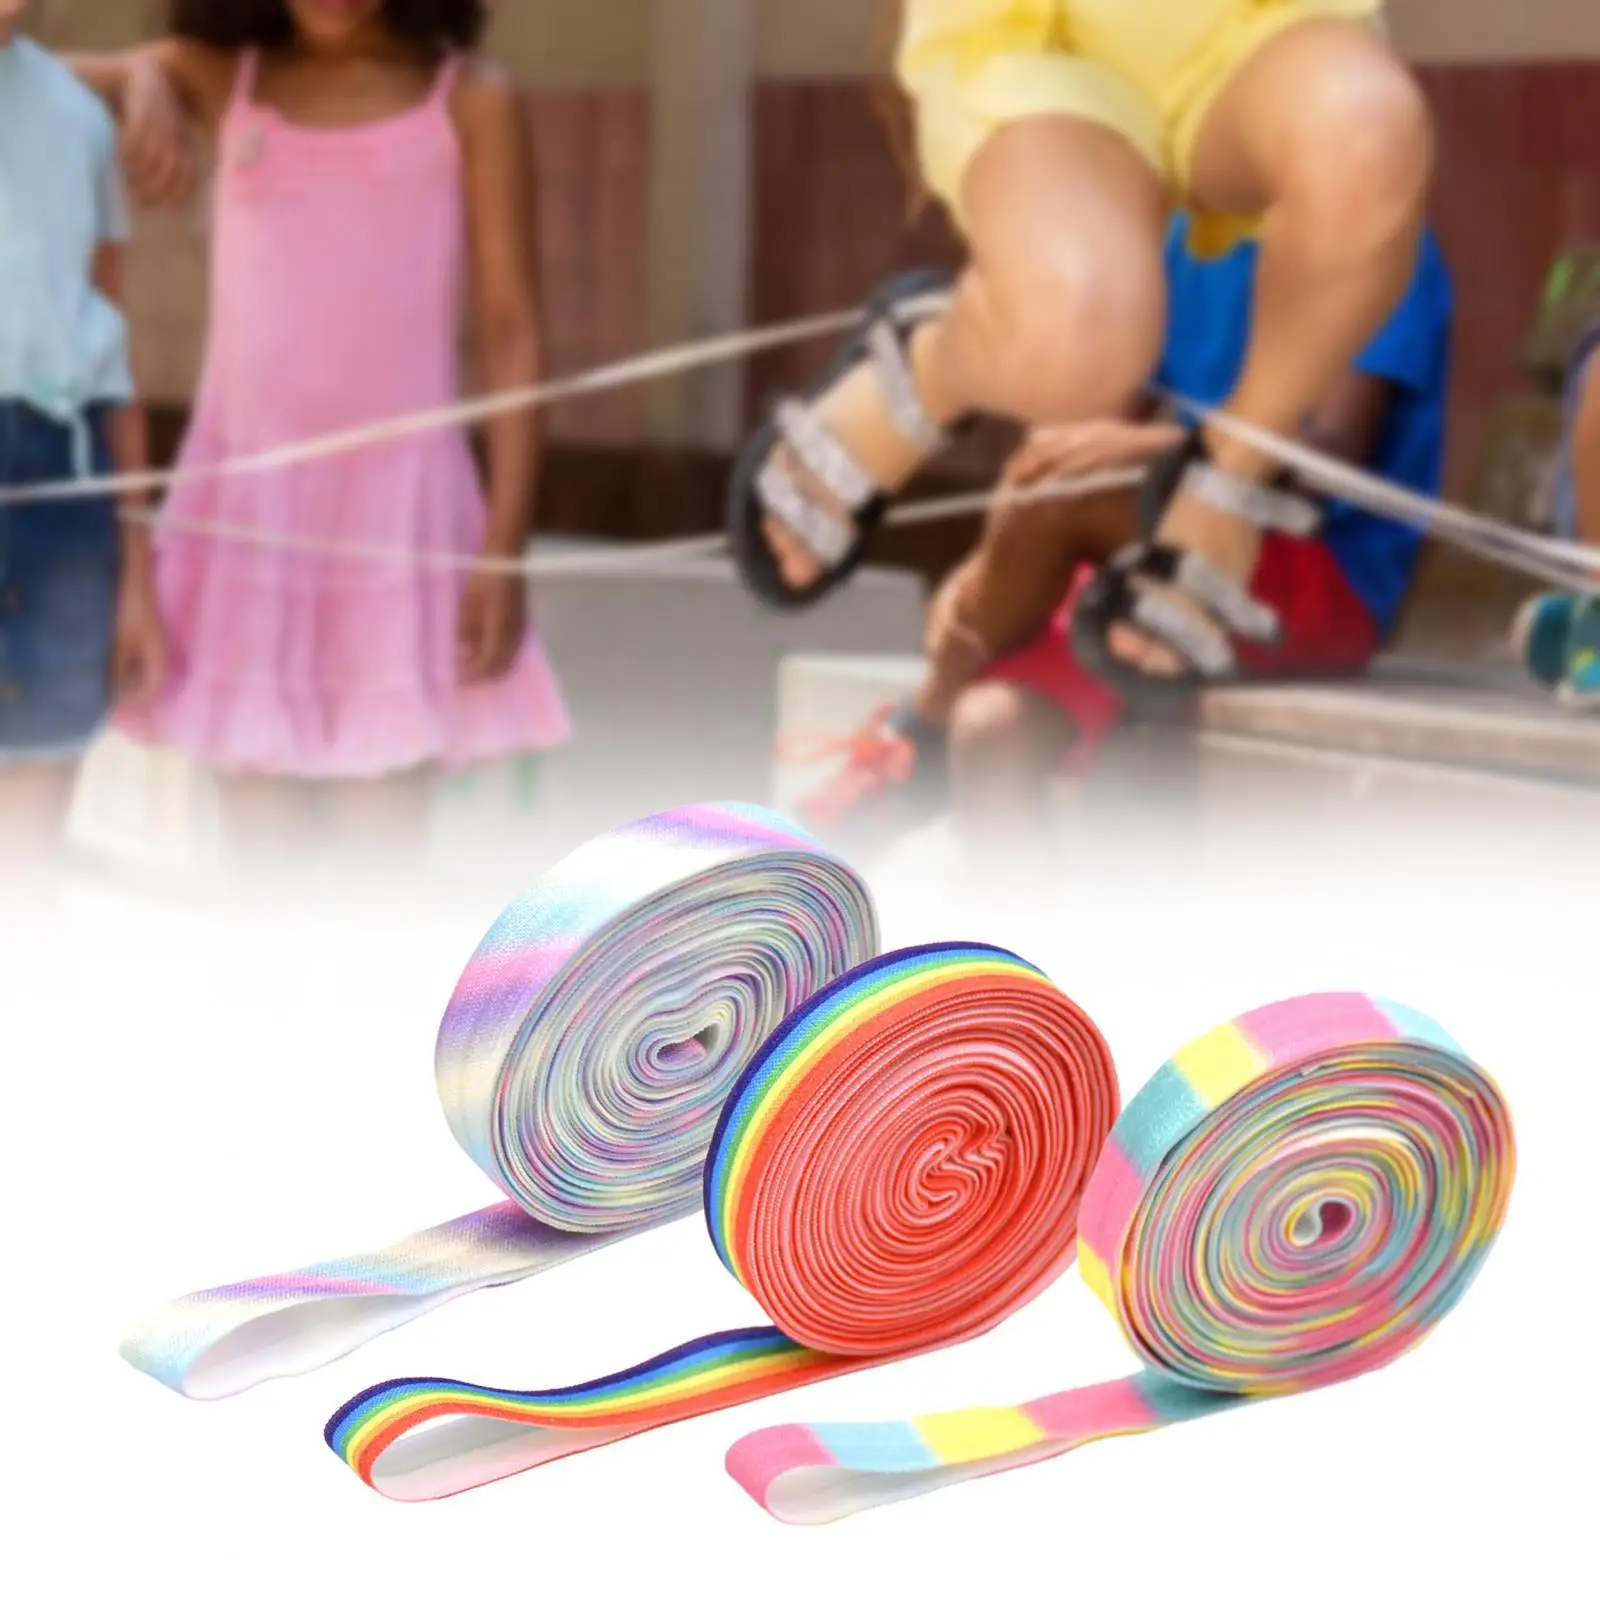 Elastic Chinese Jump Rope Elastic Chinese Ropes Children Toys Gift Boys Jumping Rope Group Jump Rope for Games Sports Party